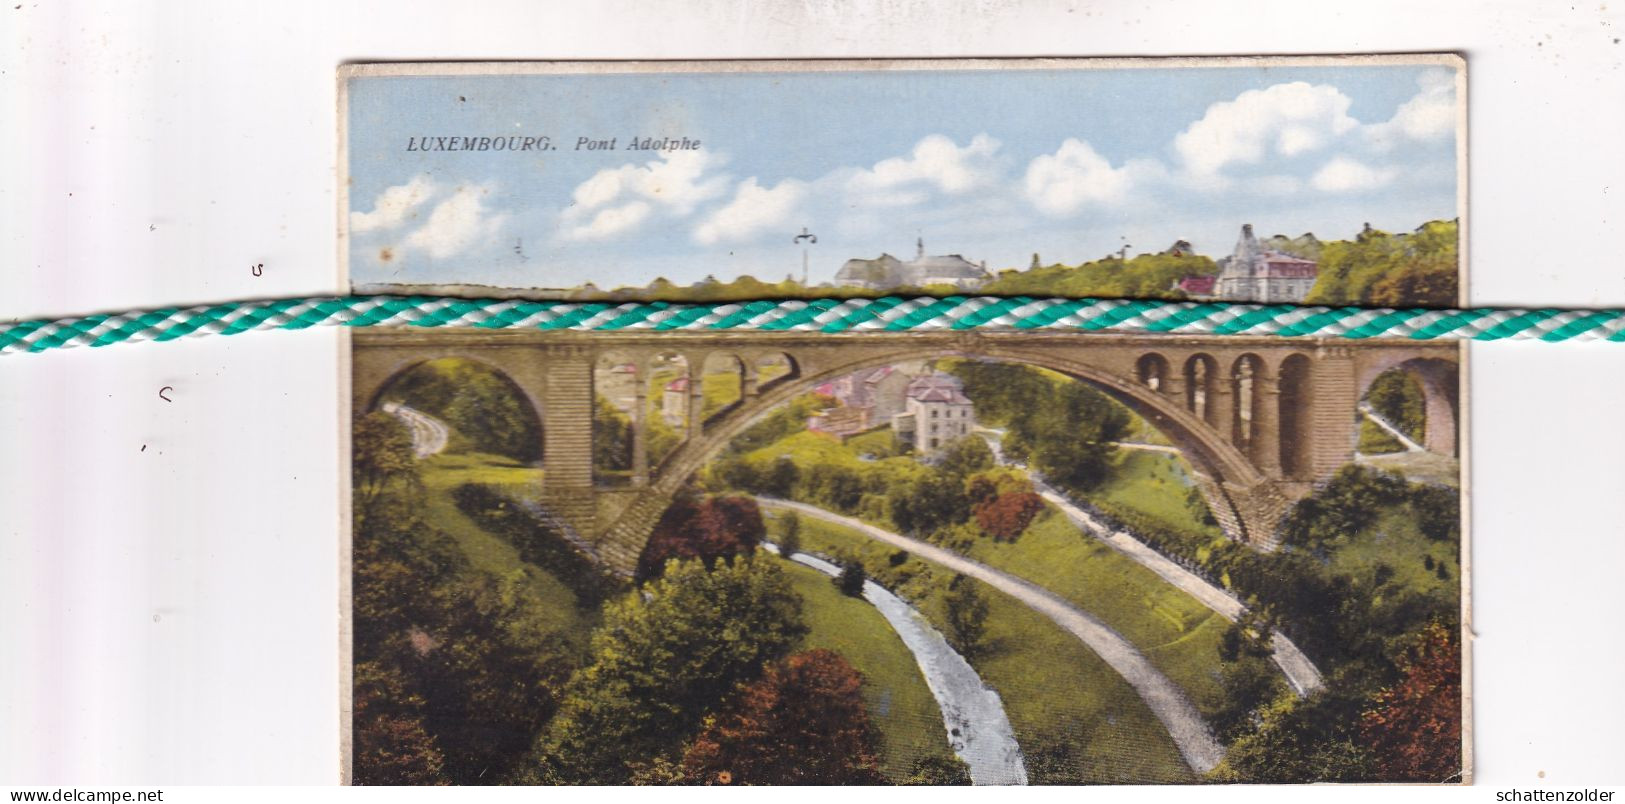 Luxembourg, Pont Adolphe 1927, Colorisé - Luxembourg - Ville